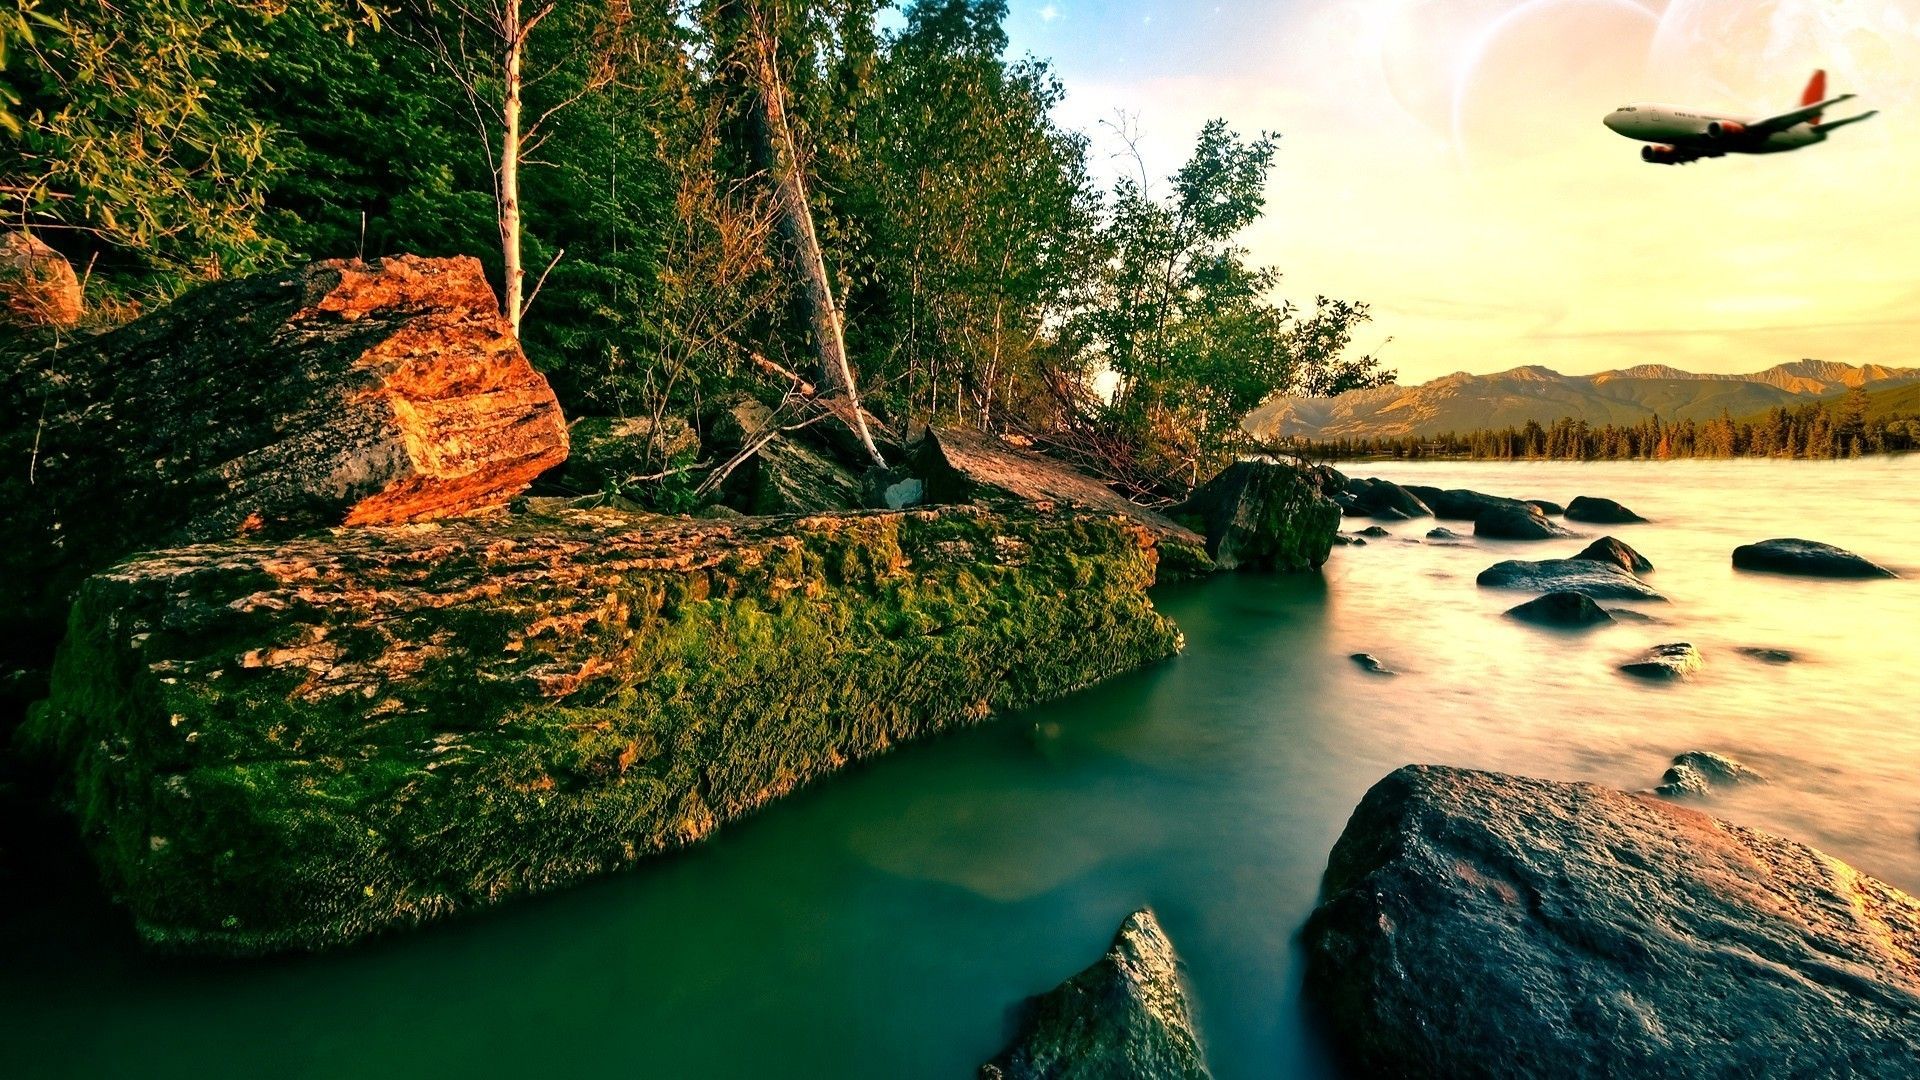 misc airplane breaking silence nature forest river rocks shore